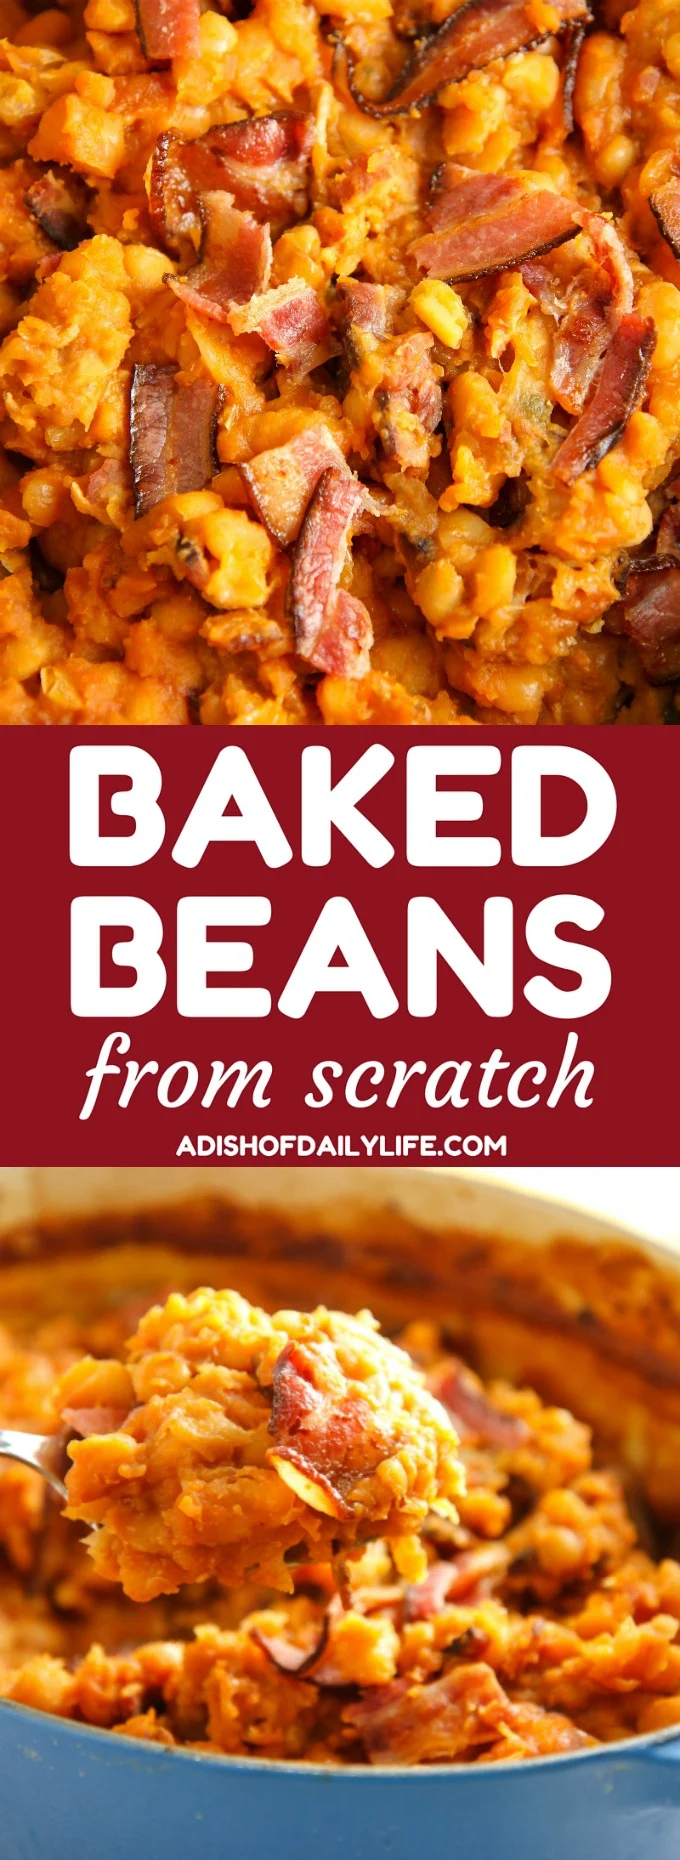 You can't have a summer BBQ without Baked Beans from scratch! This easy-to-make comfort food side dish is slow cooked in a tangy sweet and savory sauce...so much tastier than the canned version! Everyone loves this recipe!